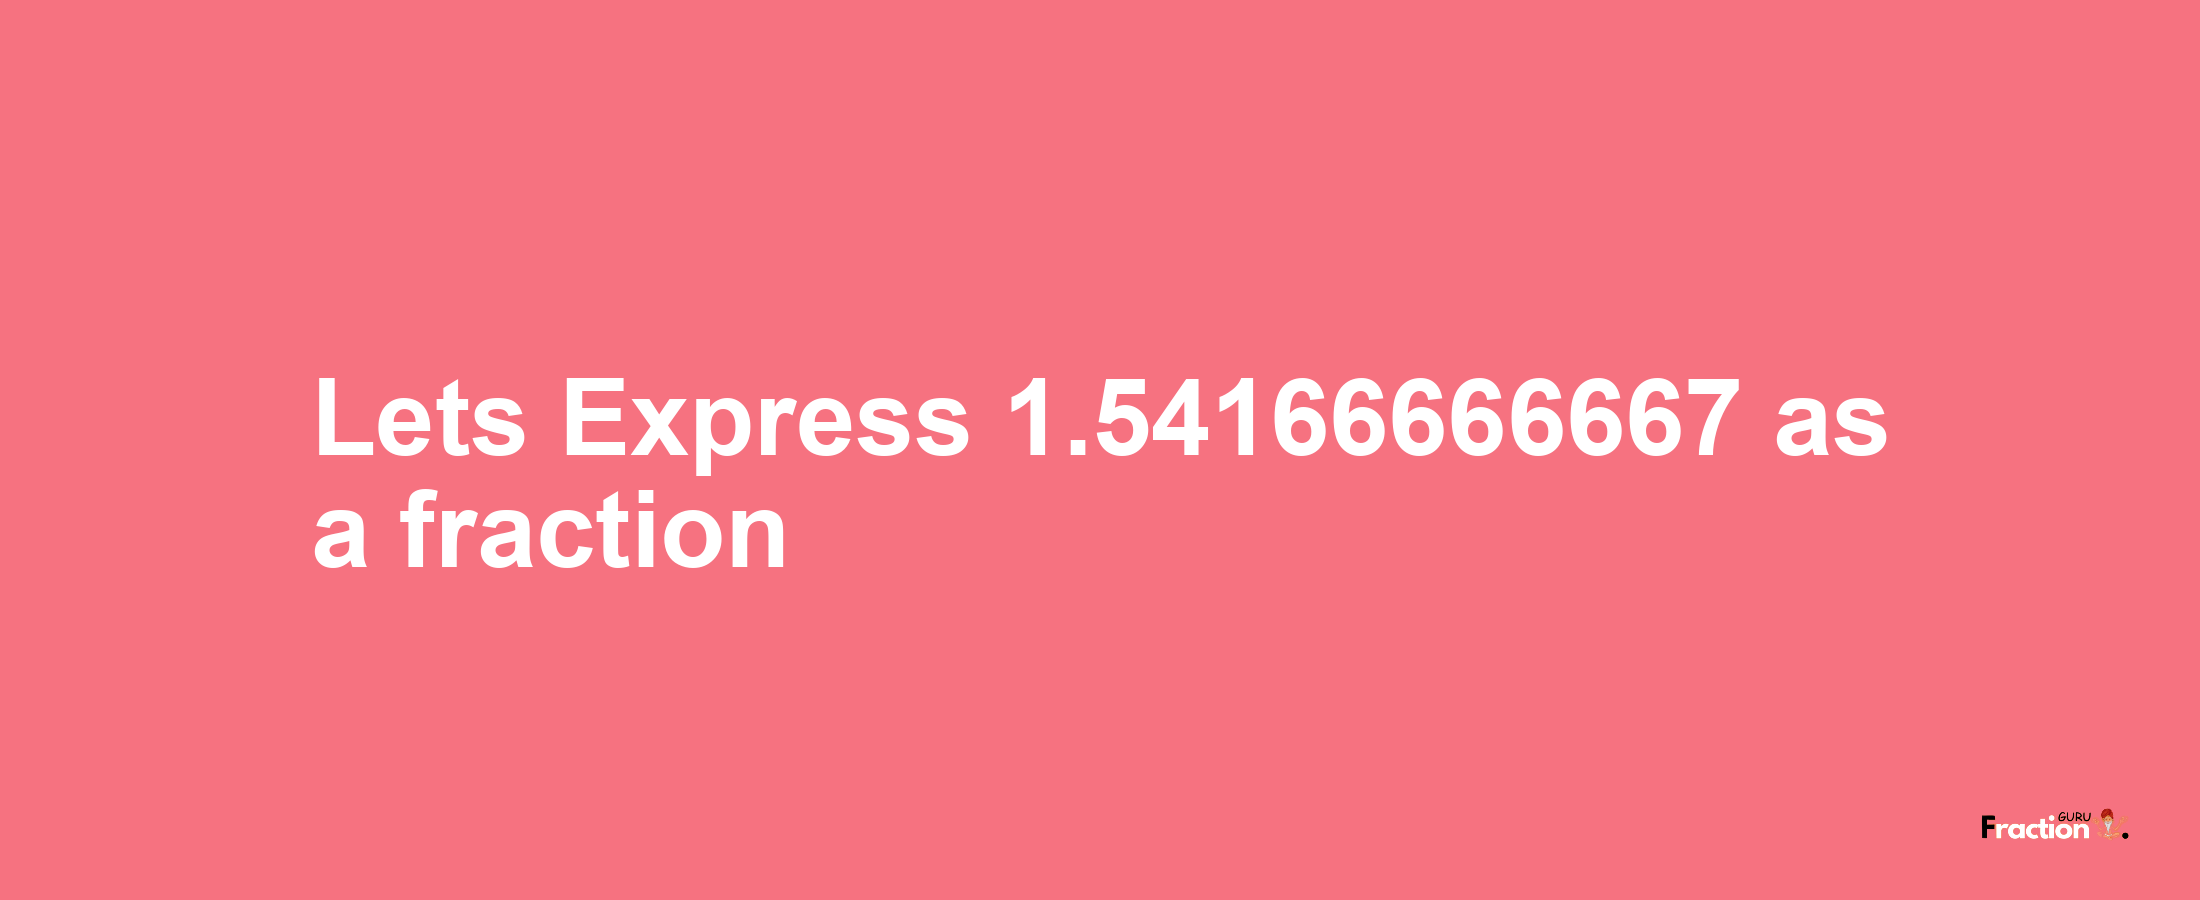 Lets Express 1.54166666667 as afraction